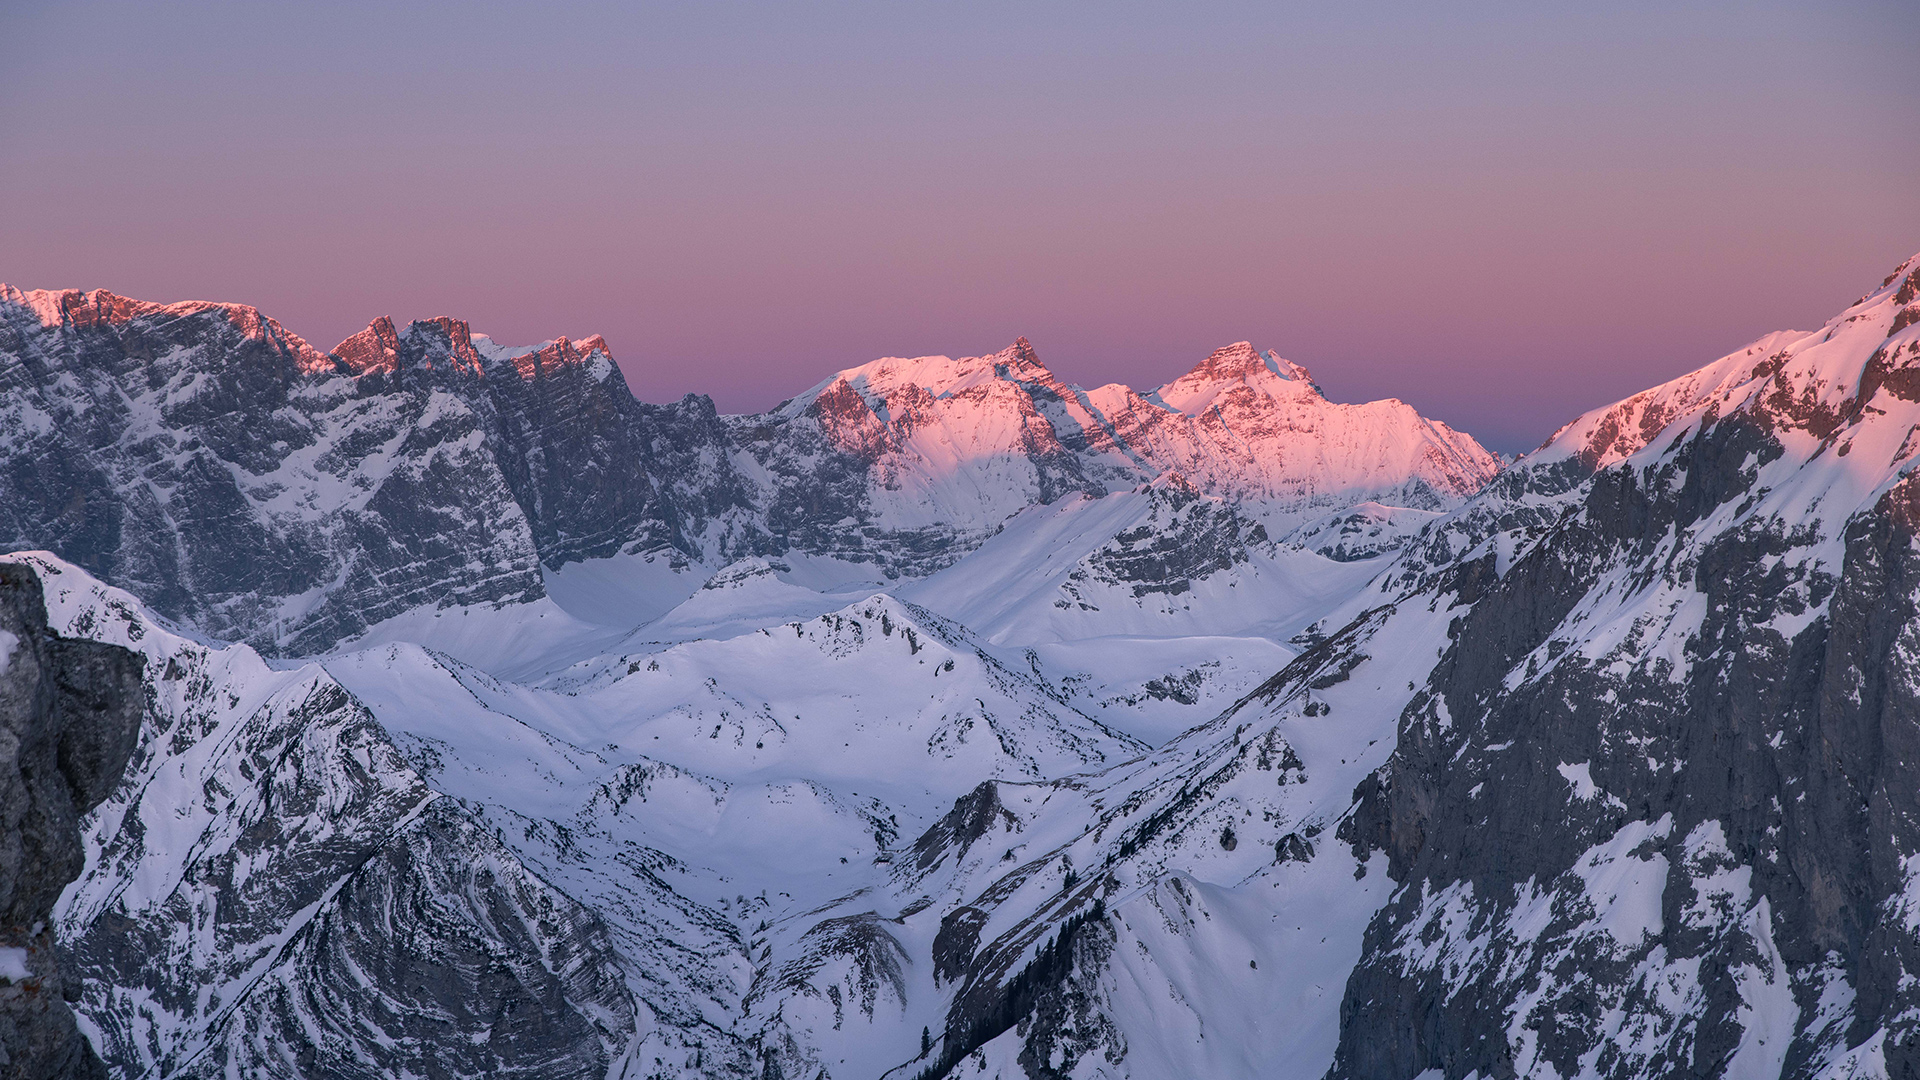 A gorgeous view of the Nature Park Karwendel at sunrise. Watch the alpenglow wash over the peaks, turning the sky violet and pink.